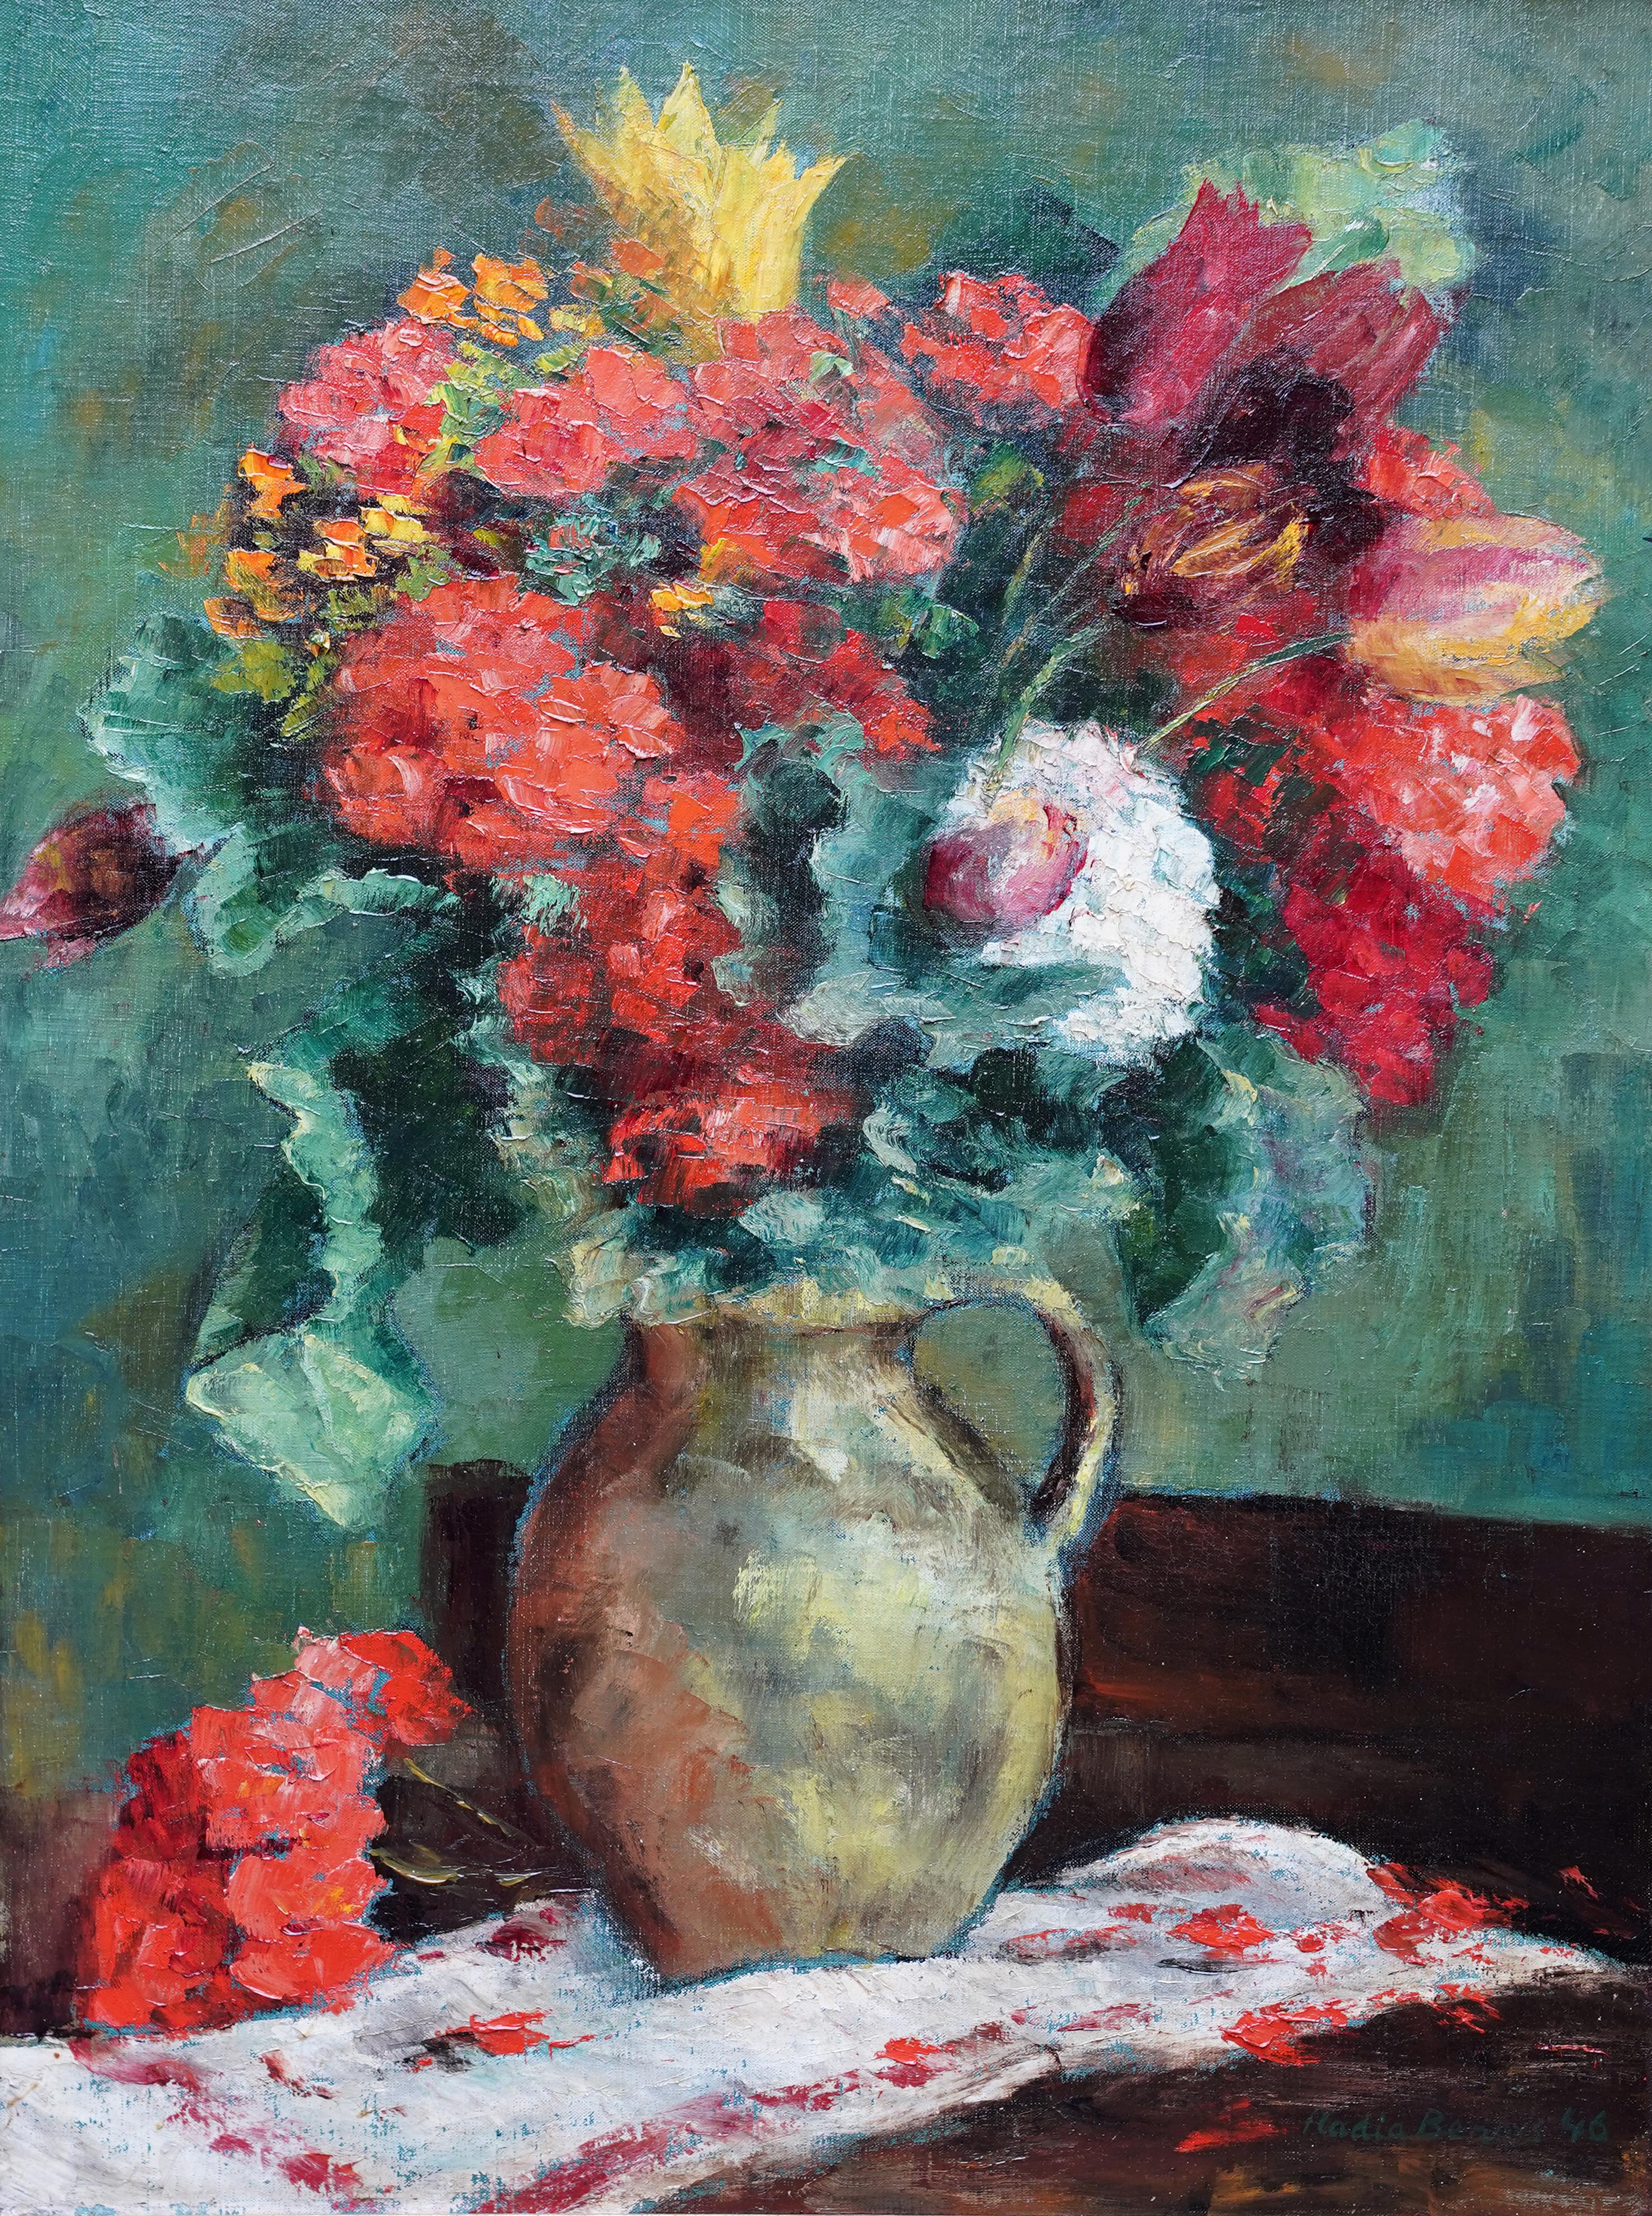 Still Life of Flowers in Jug - Post Impressionist 1940's art floral oil painting - Painting by Nadia Benois